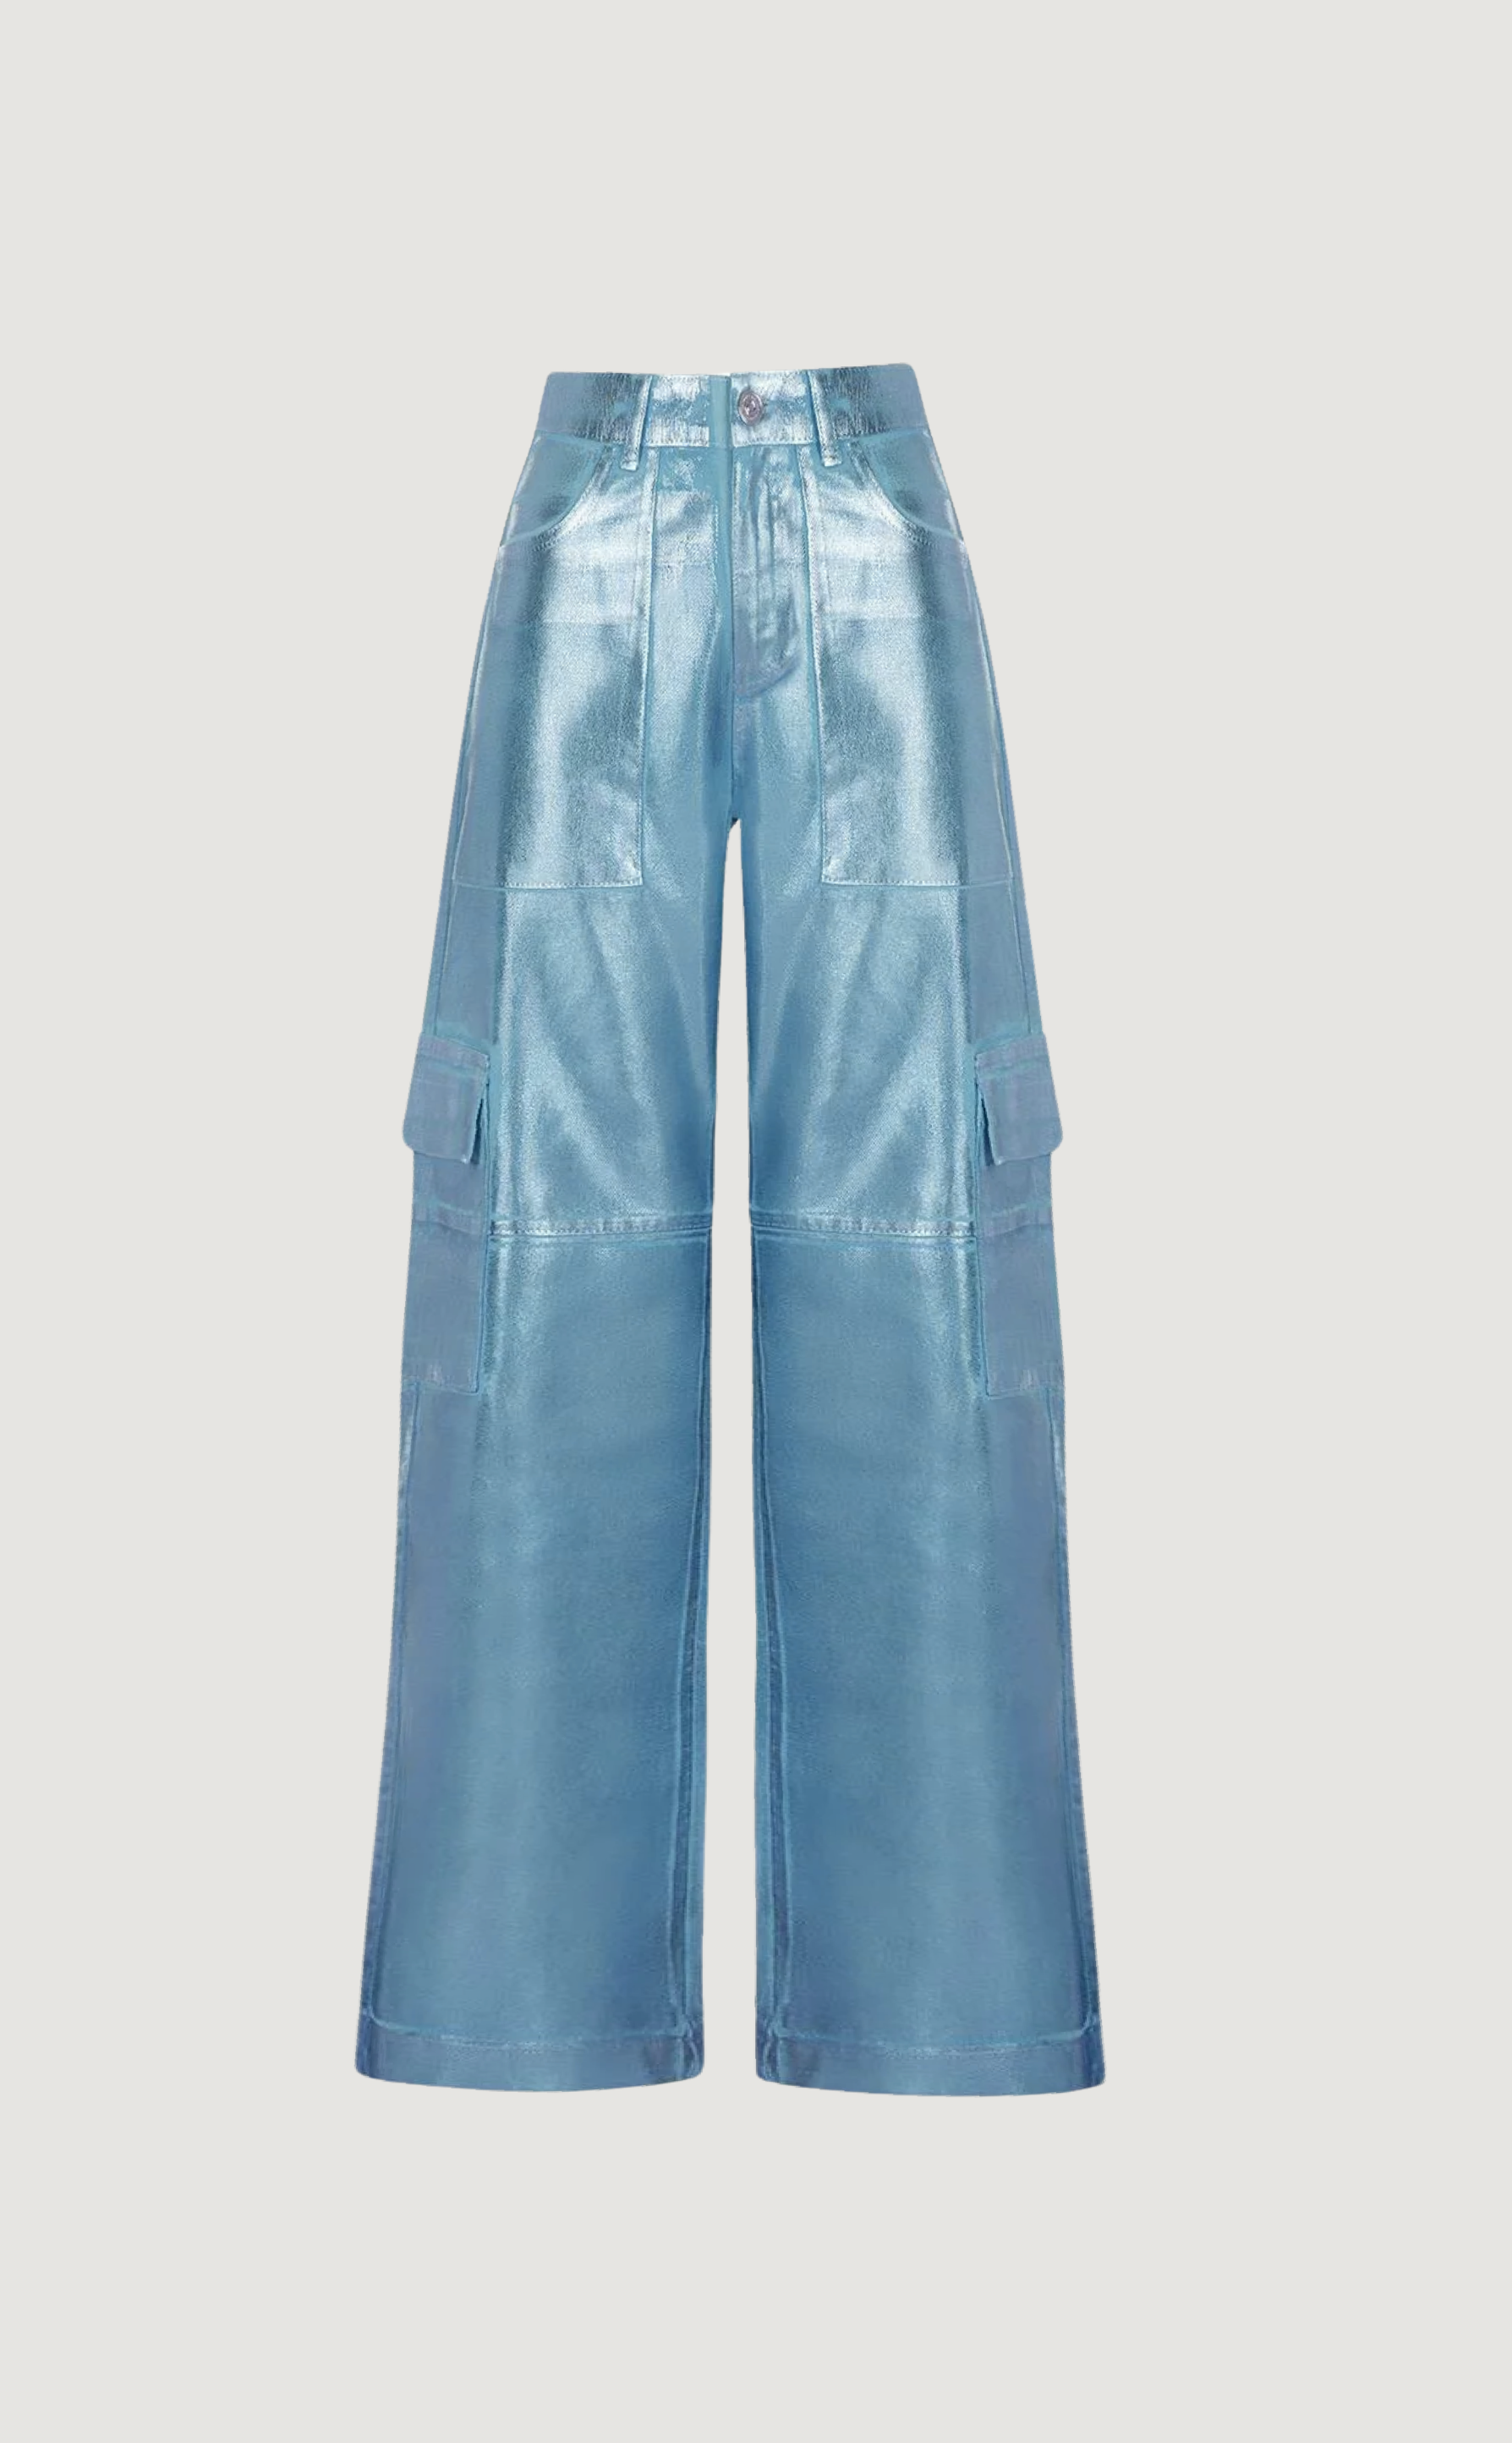 A Place in the Sun metallic cargo pants in blue